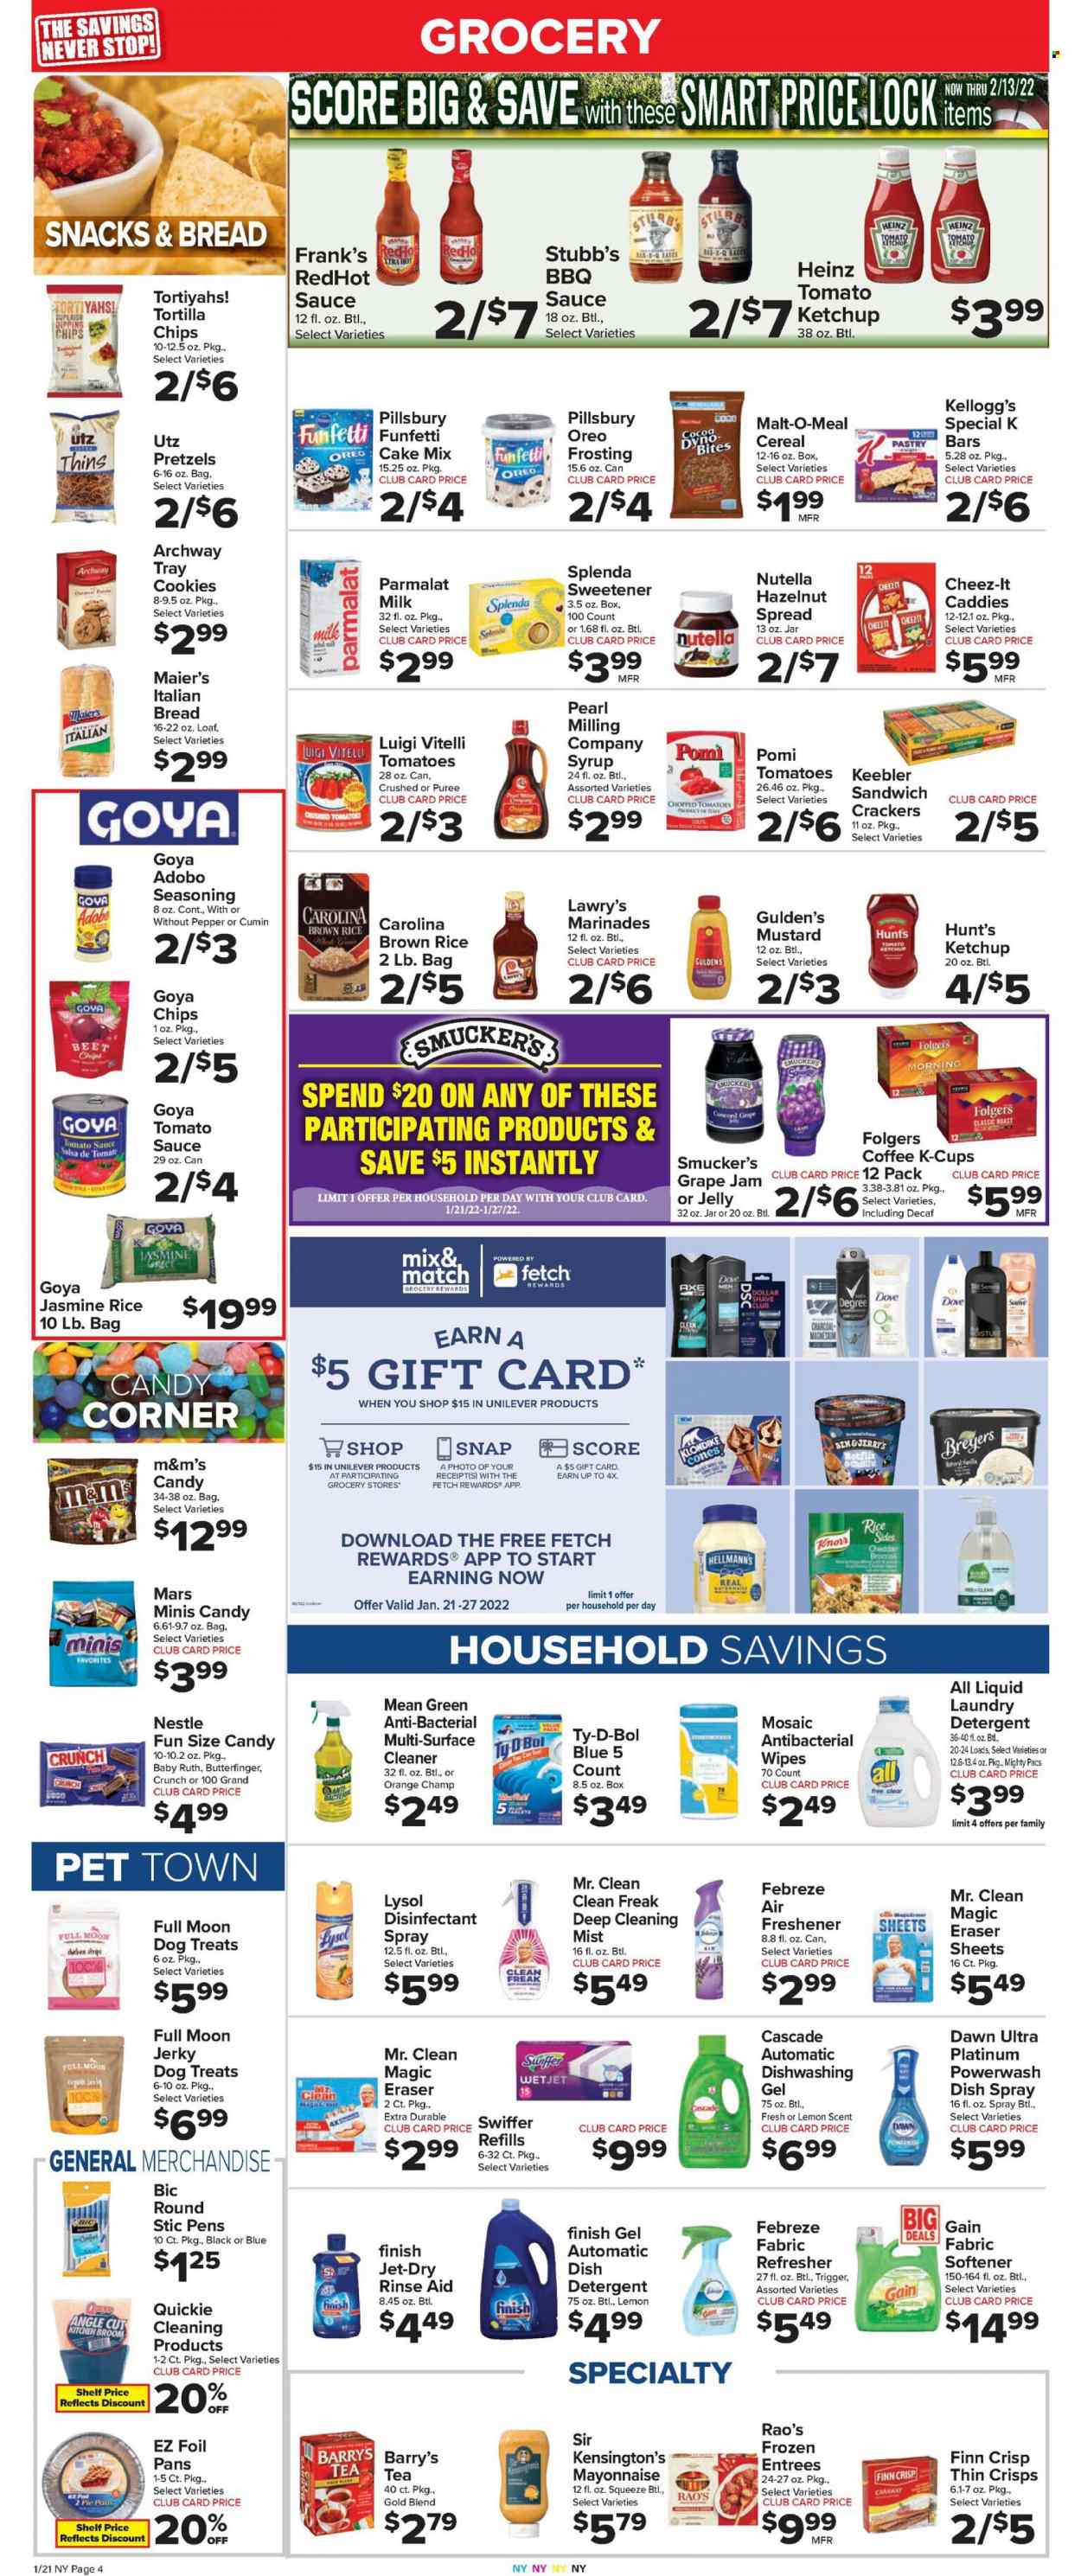 thumbnail - Foodtown Flyer - 01/21/2022 - 01/27/2022 - Sales products - bread, pretzels, pie, cake mix, tomatoes, oranges, Knorr, sauce, Pillsbury, jerky, cheese, Oreo, Parmalat, milk, mayonnaise, Hellmann’s, cookies, Nestlé, Nutella, snack, Mars, jelly, M&M's, crackers, Kellogg's, Keebler, tortilla chips, Thins, Cheez-It, frosting, malt, sweetener, tomato sauce, Heinz, Goya, cereals, brown rice, rice, jasmine rice, spice, cumin, adobo sauce, BBQ sauce, mustard, ketchup, salsa, fruit jam, syrup, hazelnut spread, tea, coffee, Folgers, coffee capsules, K-Cups, wipes, Dove, detergent, Febreze, Gain, cleaner, desinfection, Lysol, Swiffer, Cascade, fabric softener, Jet, refresher, BIC, broom, WetJet, tray, eraser, air freshener, charcoal, magnesium. Page 6.